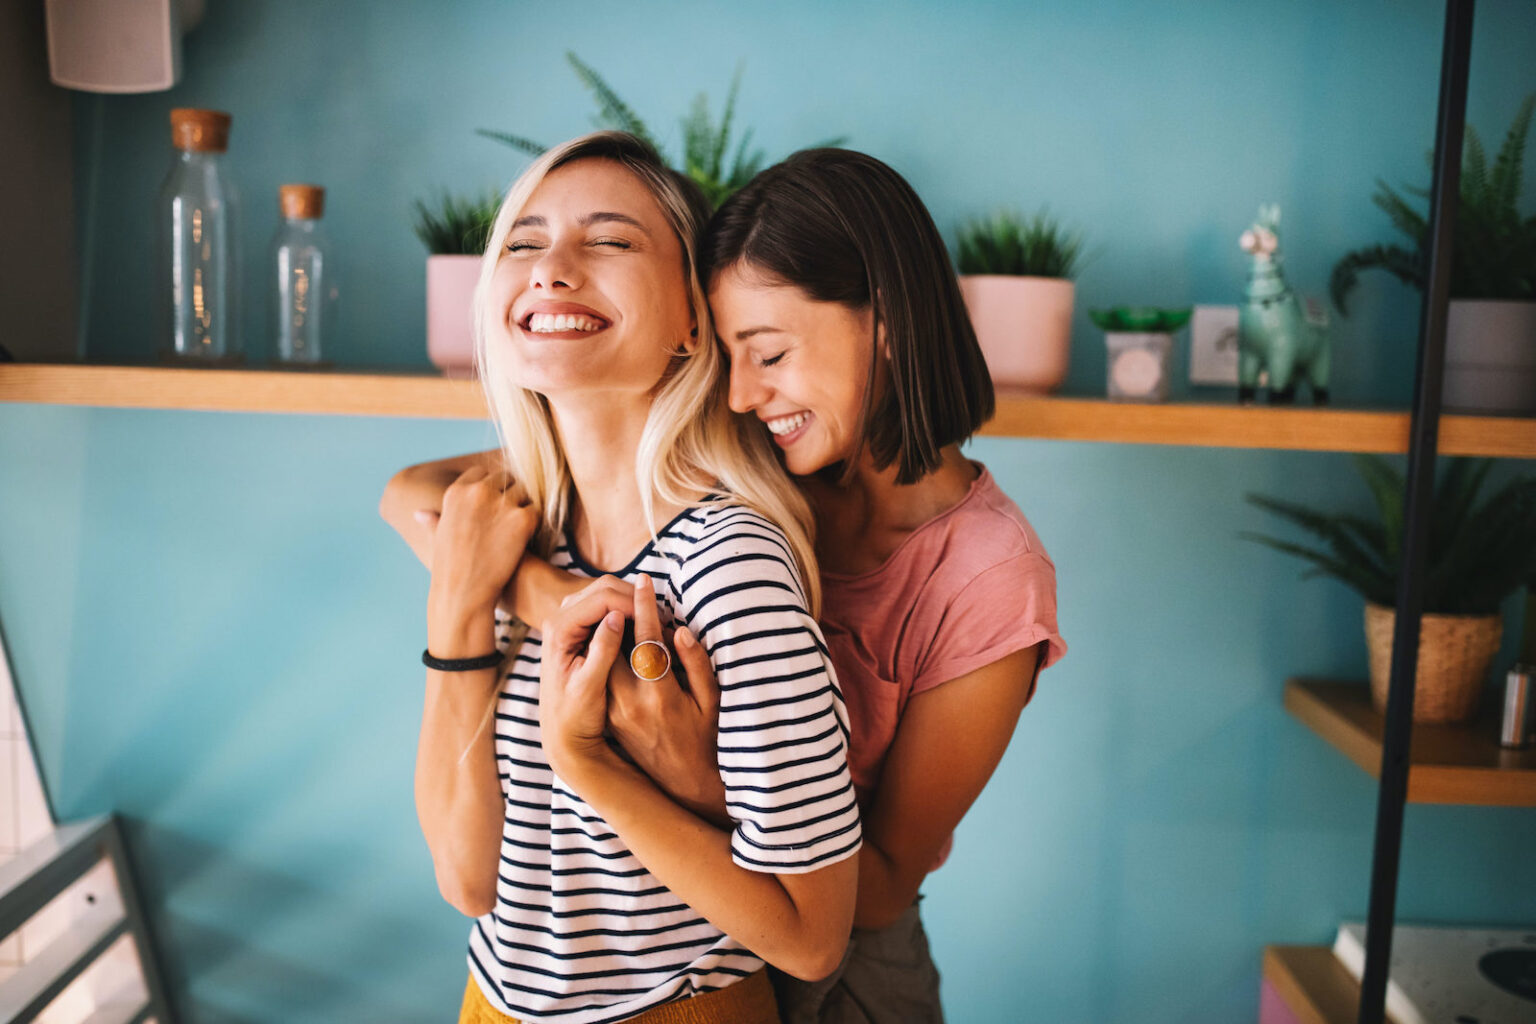 Online dating is now the best way lesbians, gays, or queers meet. So, LGBT singles are always asking, "What are the best dating apps for gays and lesbians?"